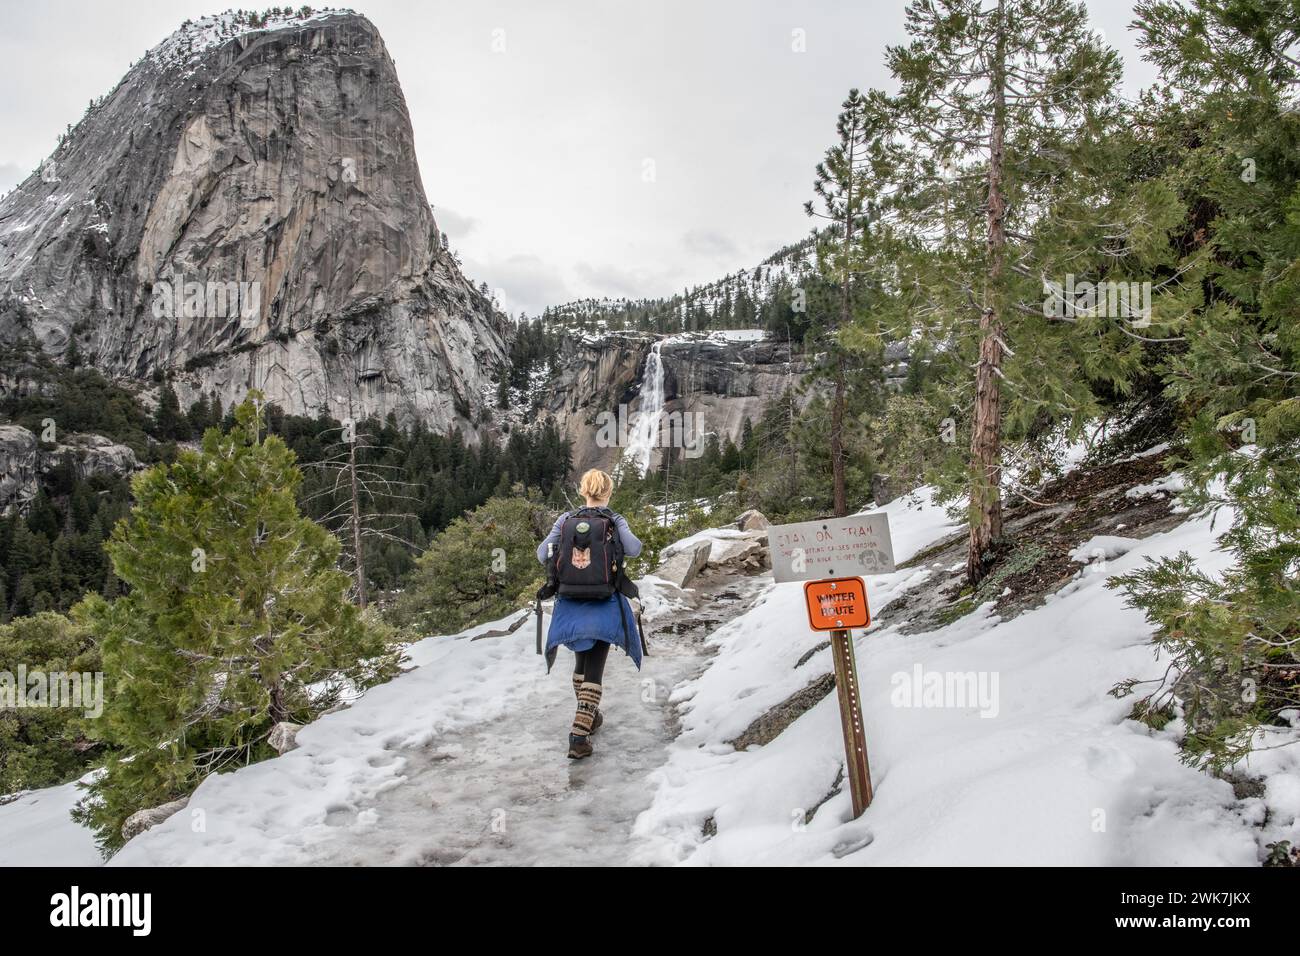 Hiking a snowy & icy winter route trail in Yosemite National Park in the Sierra Nevada mtns, California towards a waterfall in the distant landscape. Stock Photo